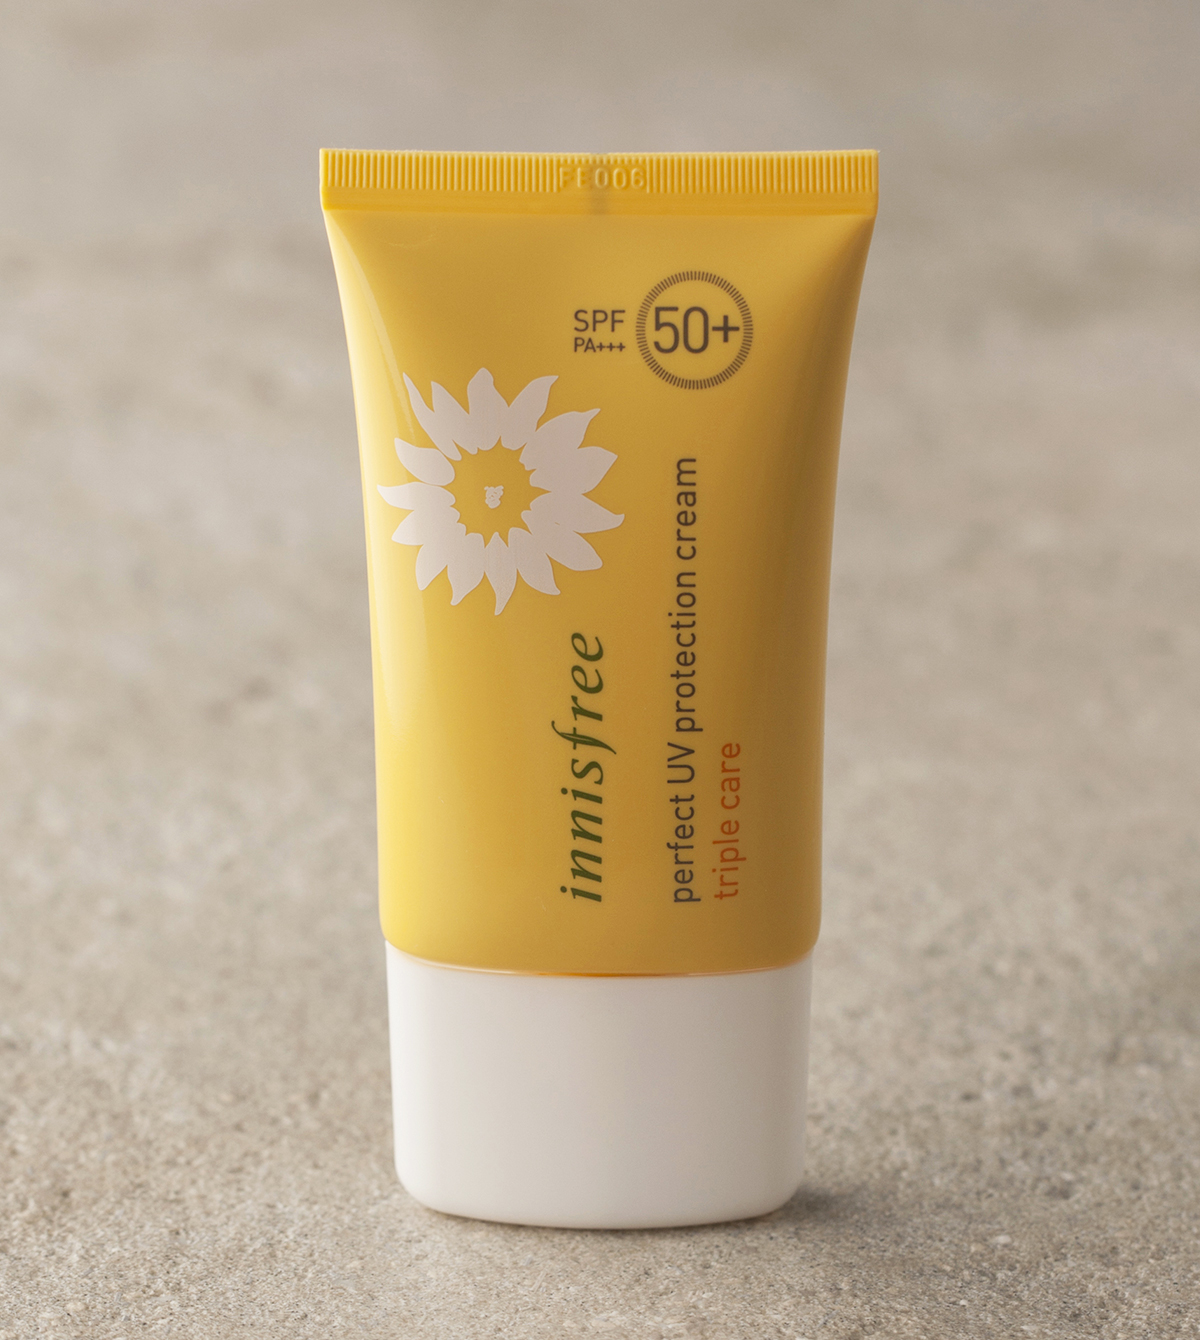 Top 12 skin care products from Innisfree